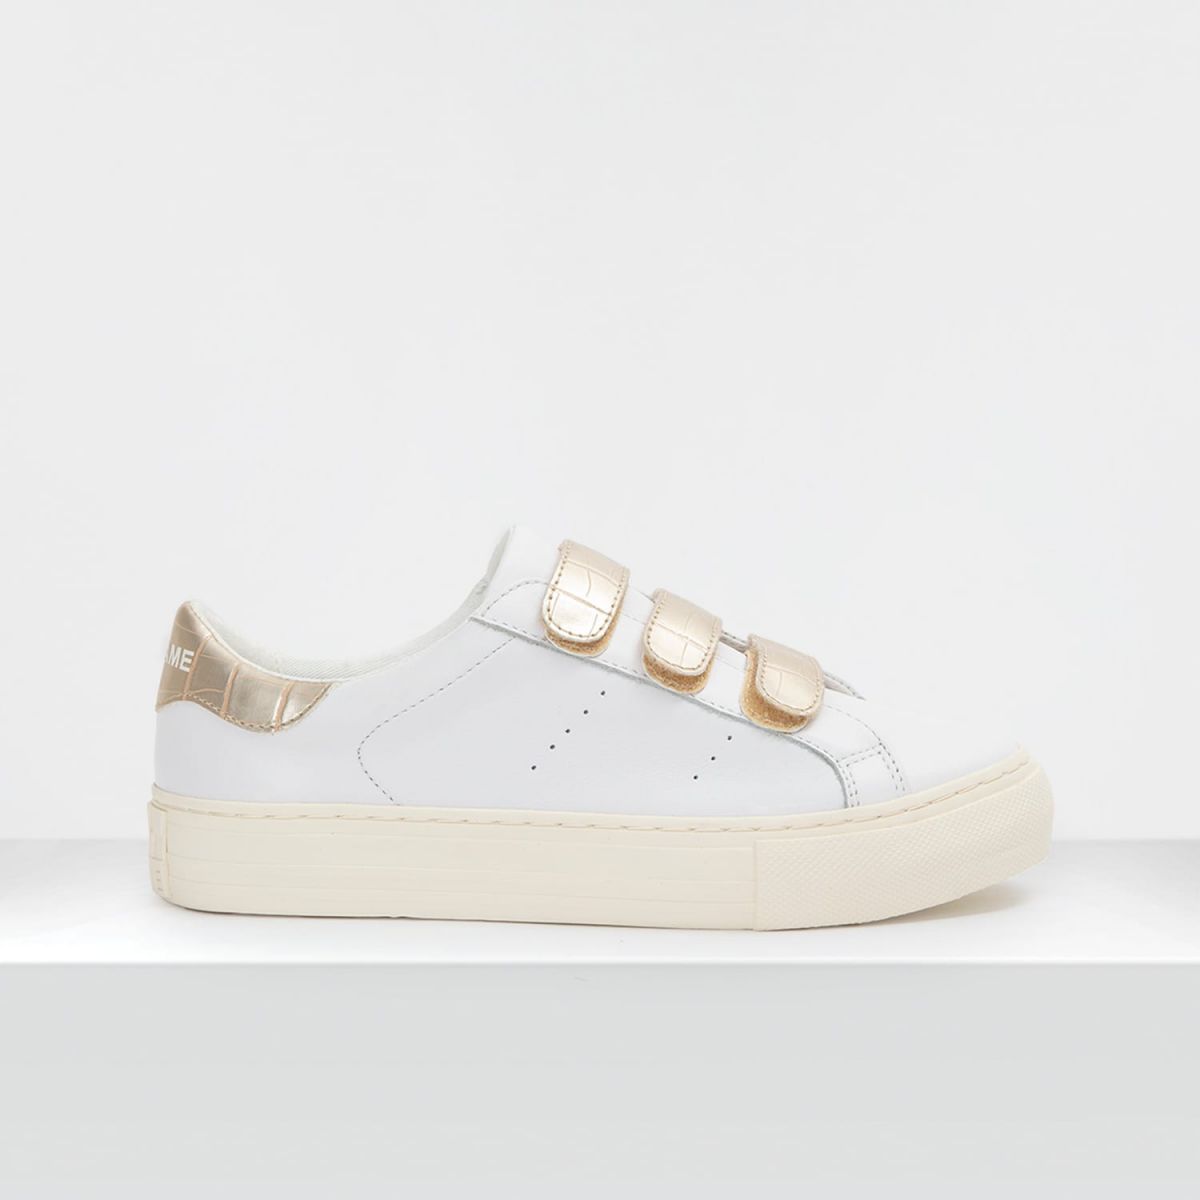 Arcade Straps White Gold Sneakers KNGDSC0474 - 6